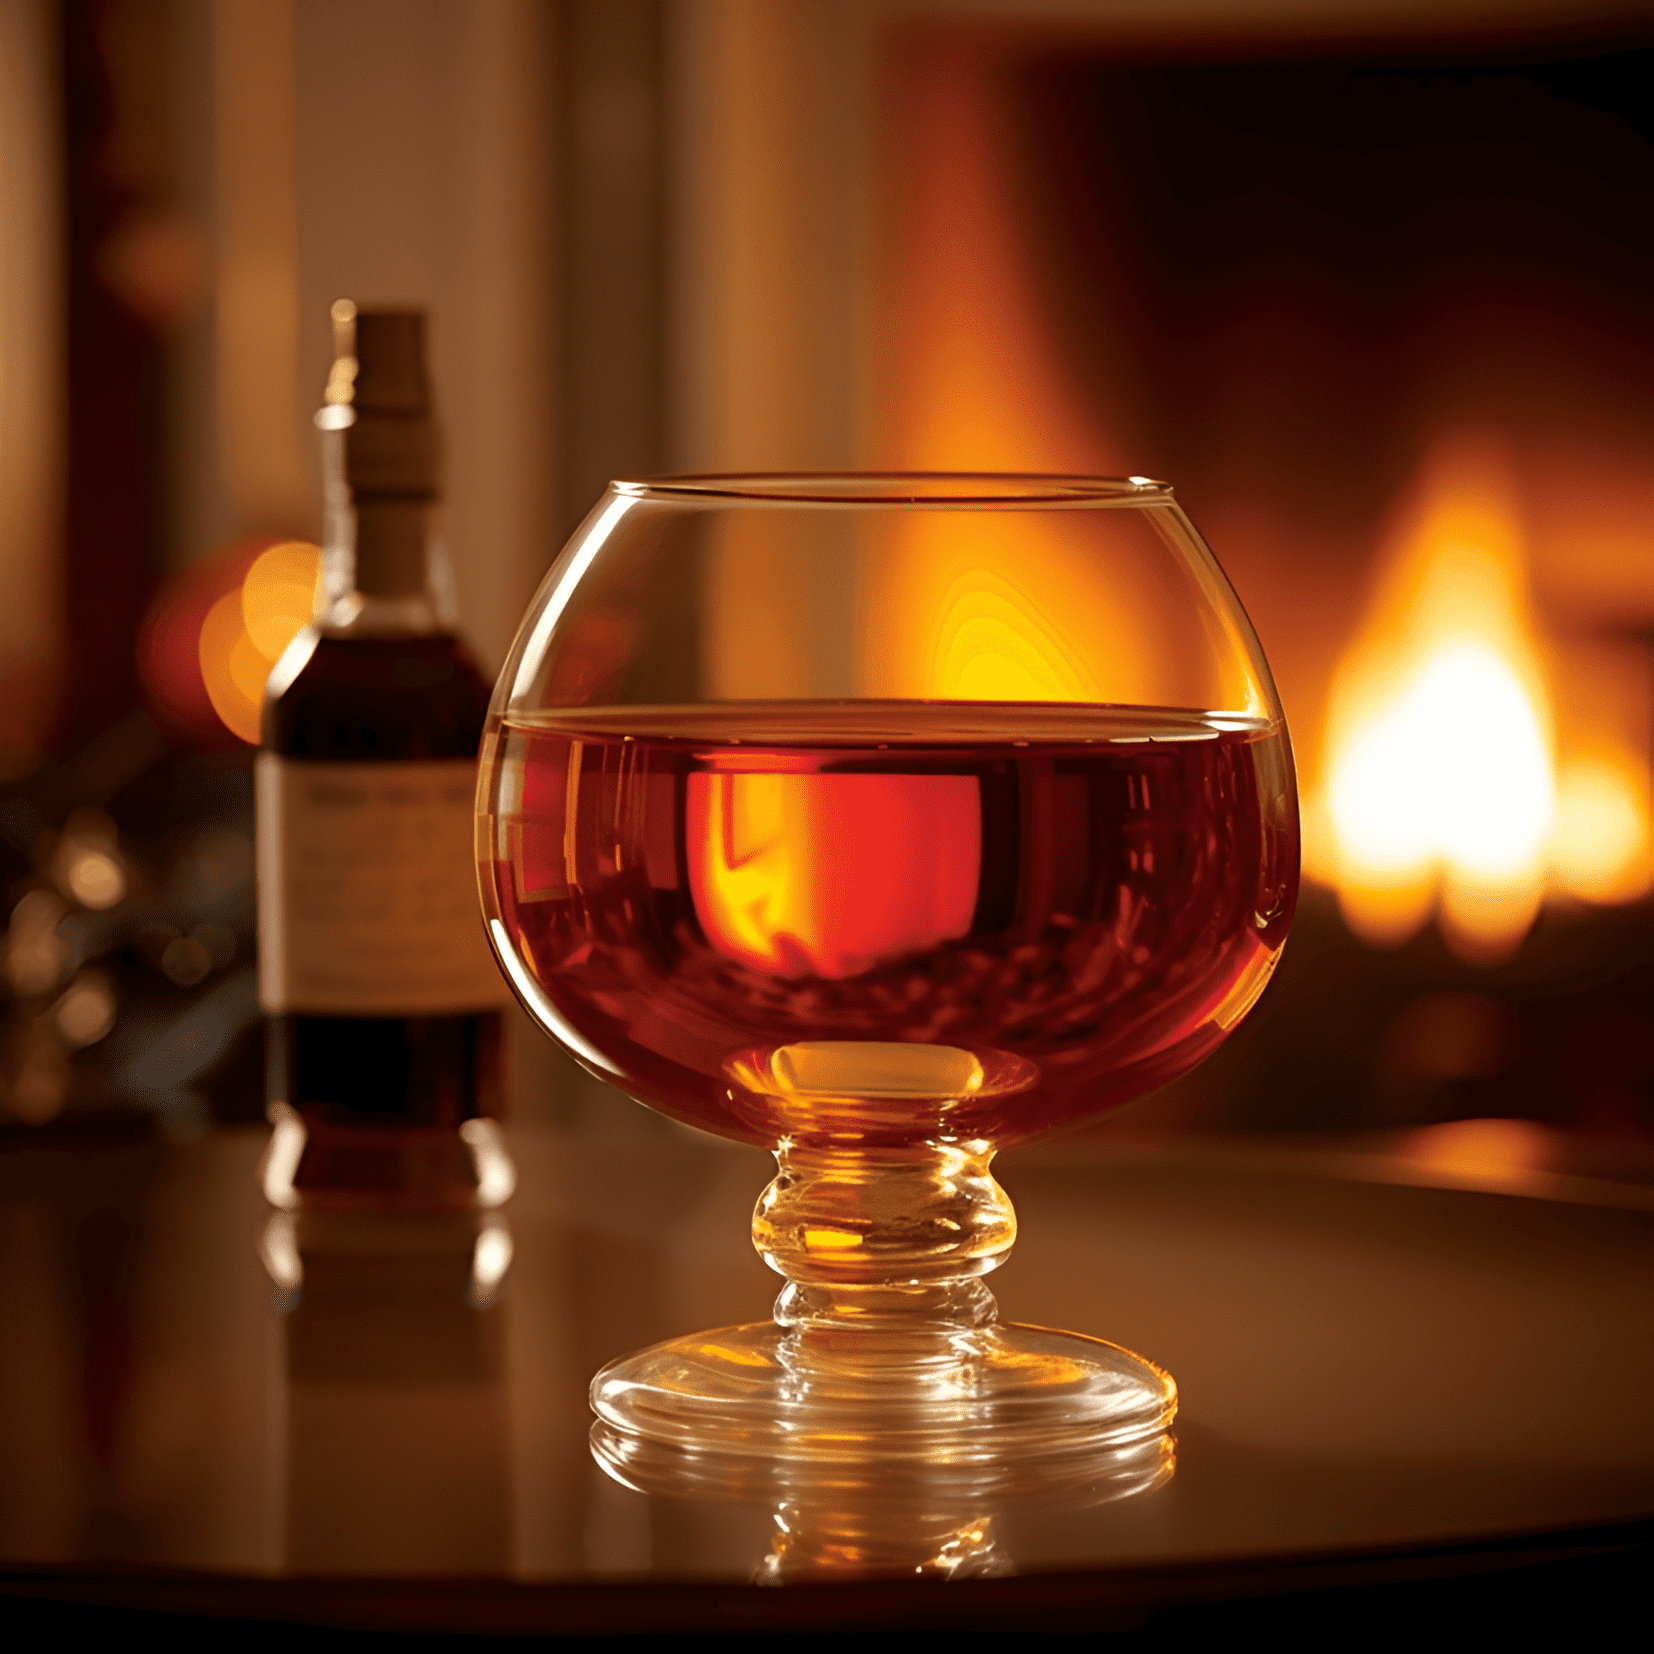 Nightcap Cocktail Recipe - The Nightcap cocktail is a smooth, warming, and slightly sweet drink with a hint of spice. The combination of flavors creates a well-balanced and soothing taste that is perfect for sipping slowly as you unwind.